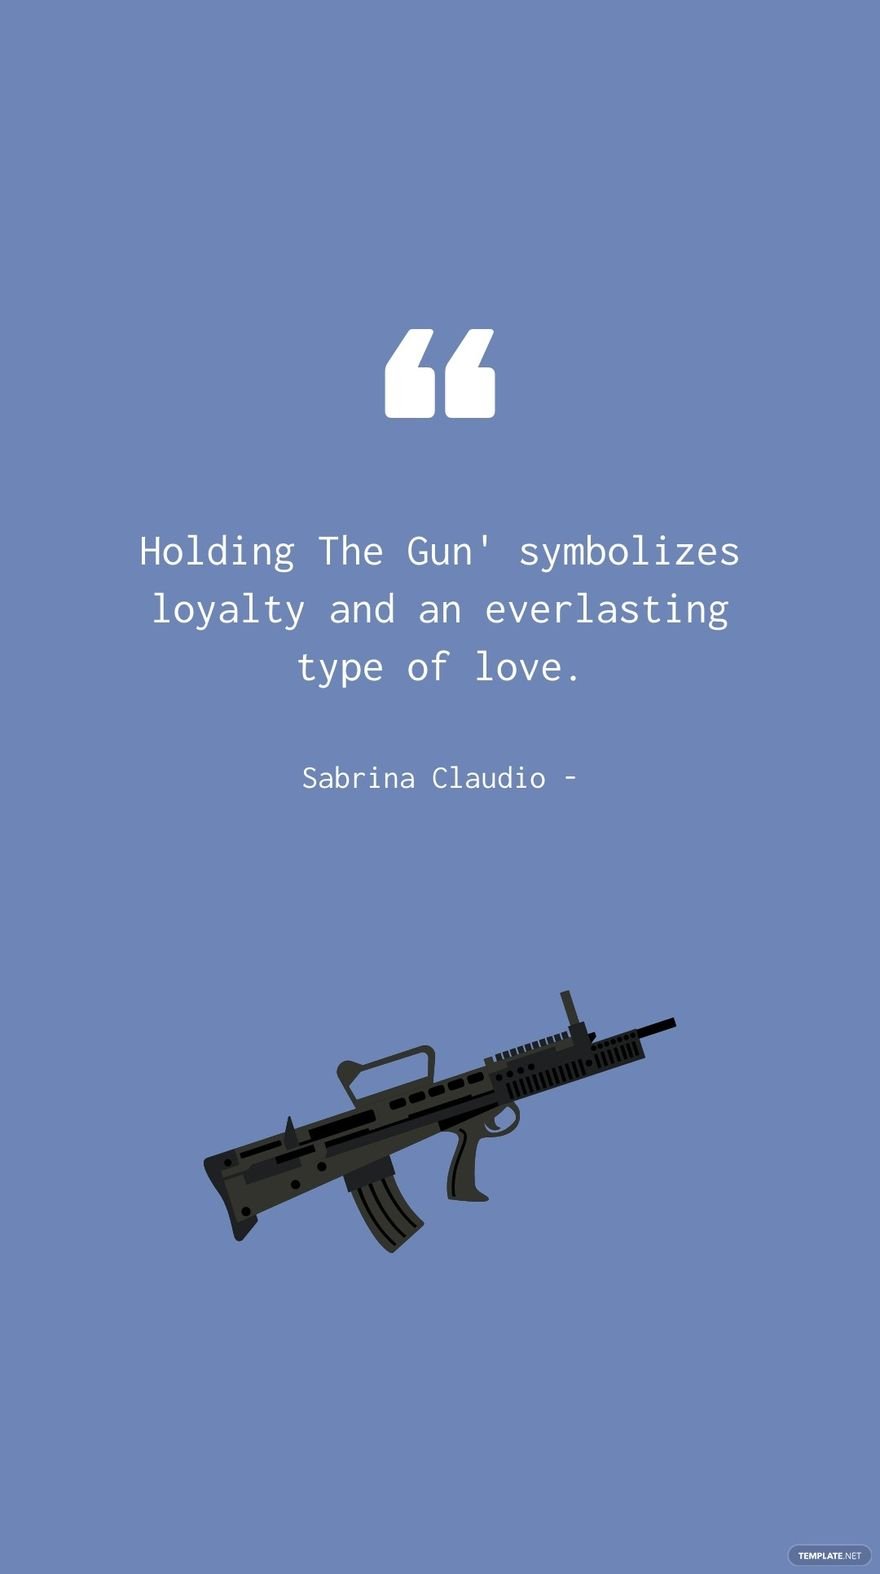 Sabrina Claudio - Holding The Gun' symbolizes loyalty and an everlasting type of love. in JPG